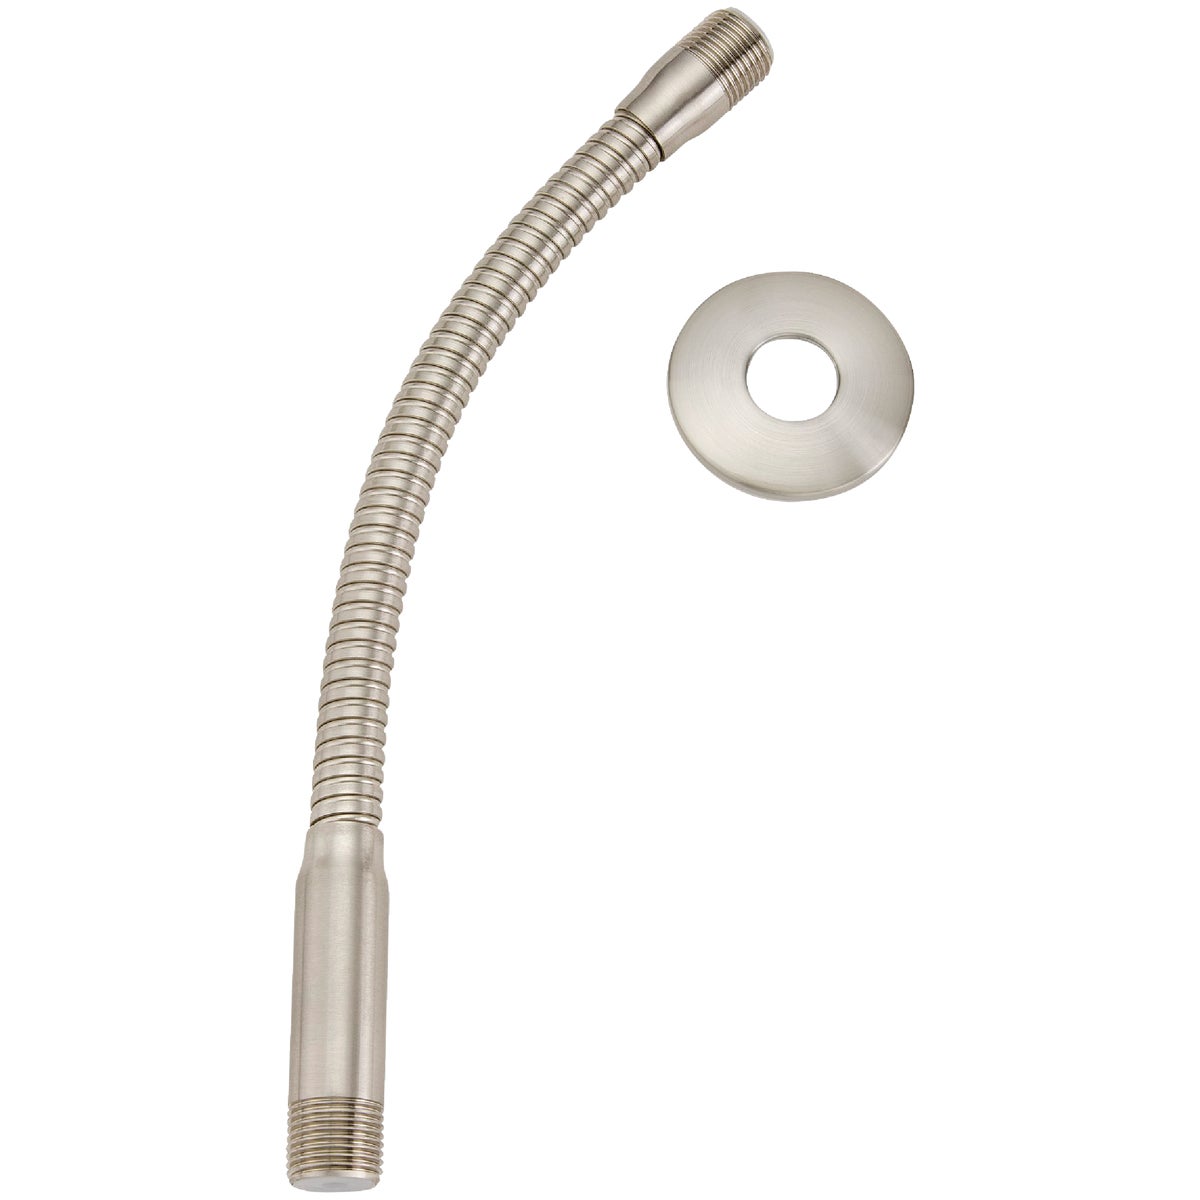 Do it Best 11-1/2 In. Brushed Nickel Flexible Shower Arm with Flange